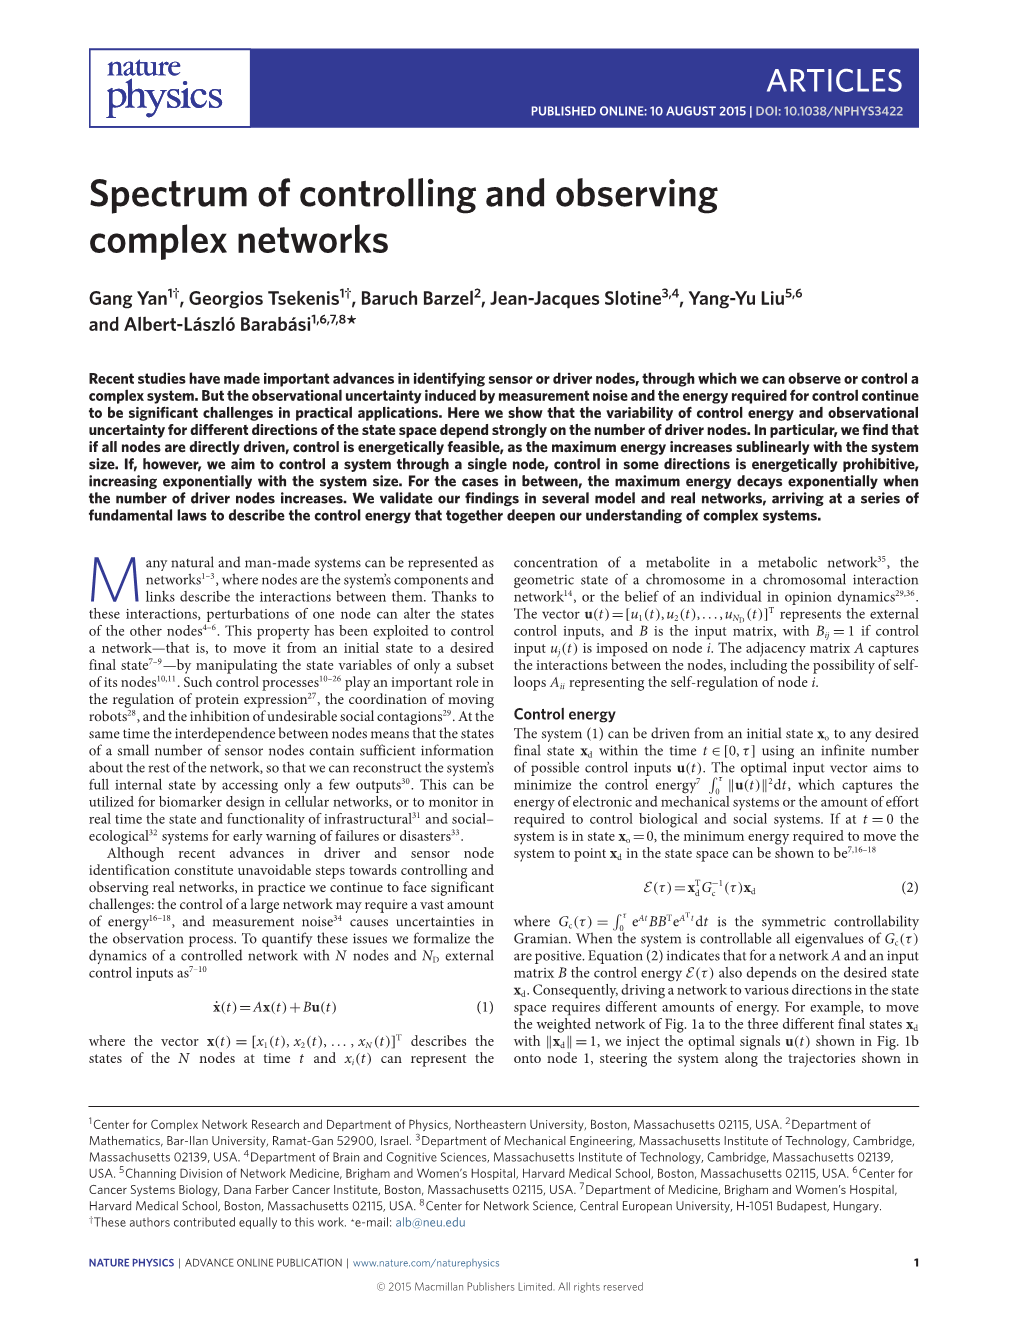 Spectrum of Controlling and Observing Complex Networks